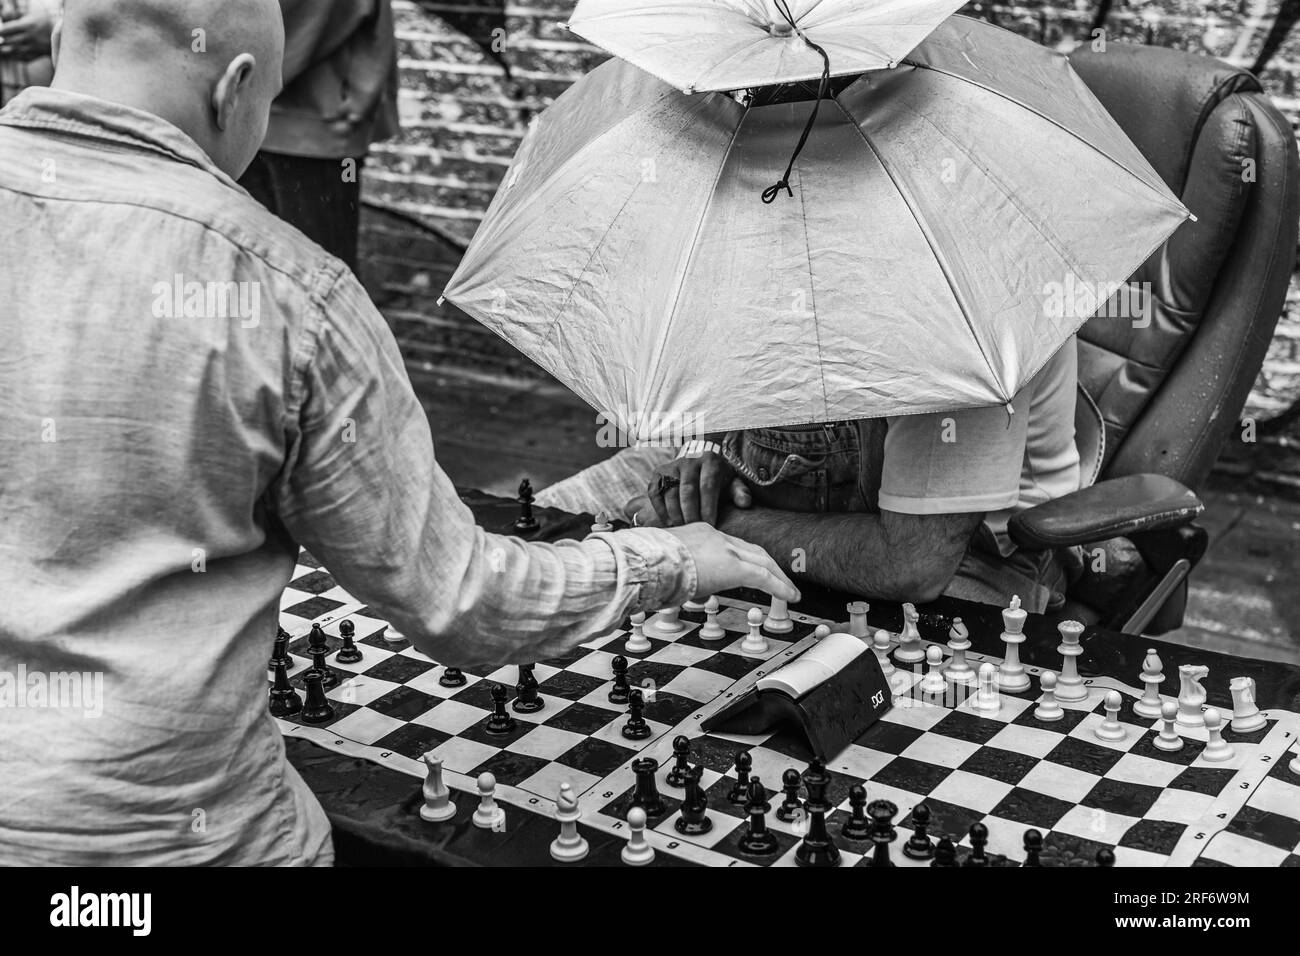 It may be raining, but the speedy chess game continues on Brick Lane in the rain in London. Stock Photo